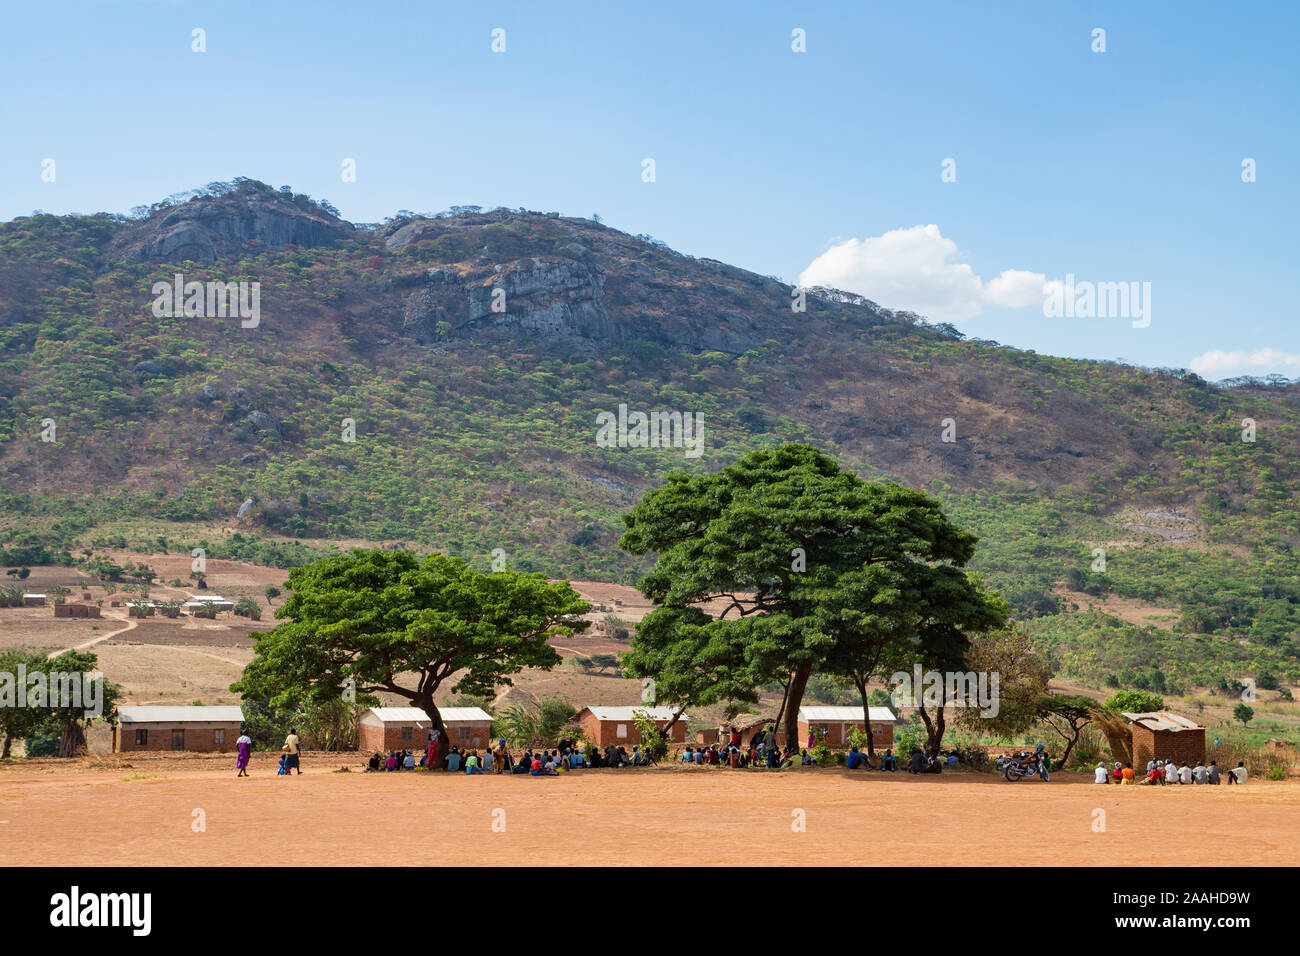 Village meeting under tree cover in a remote part of northern Malawi Stock Photo